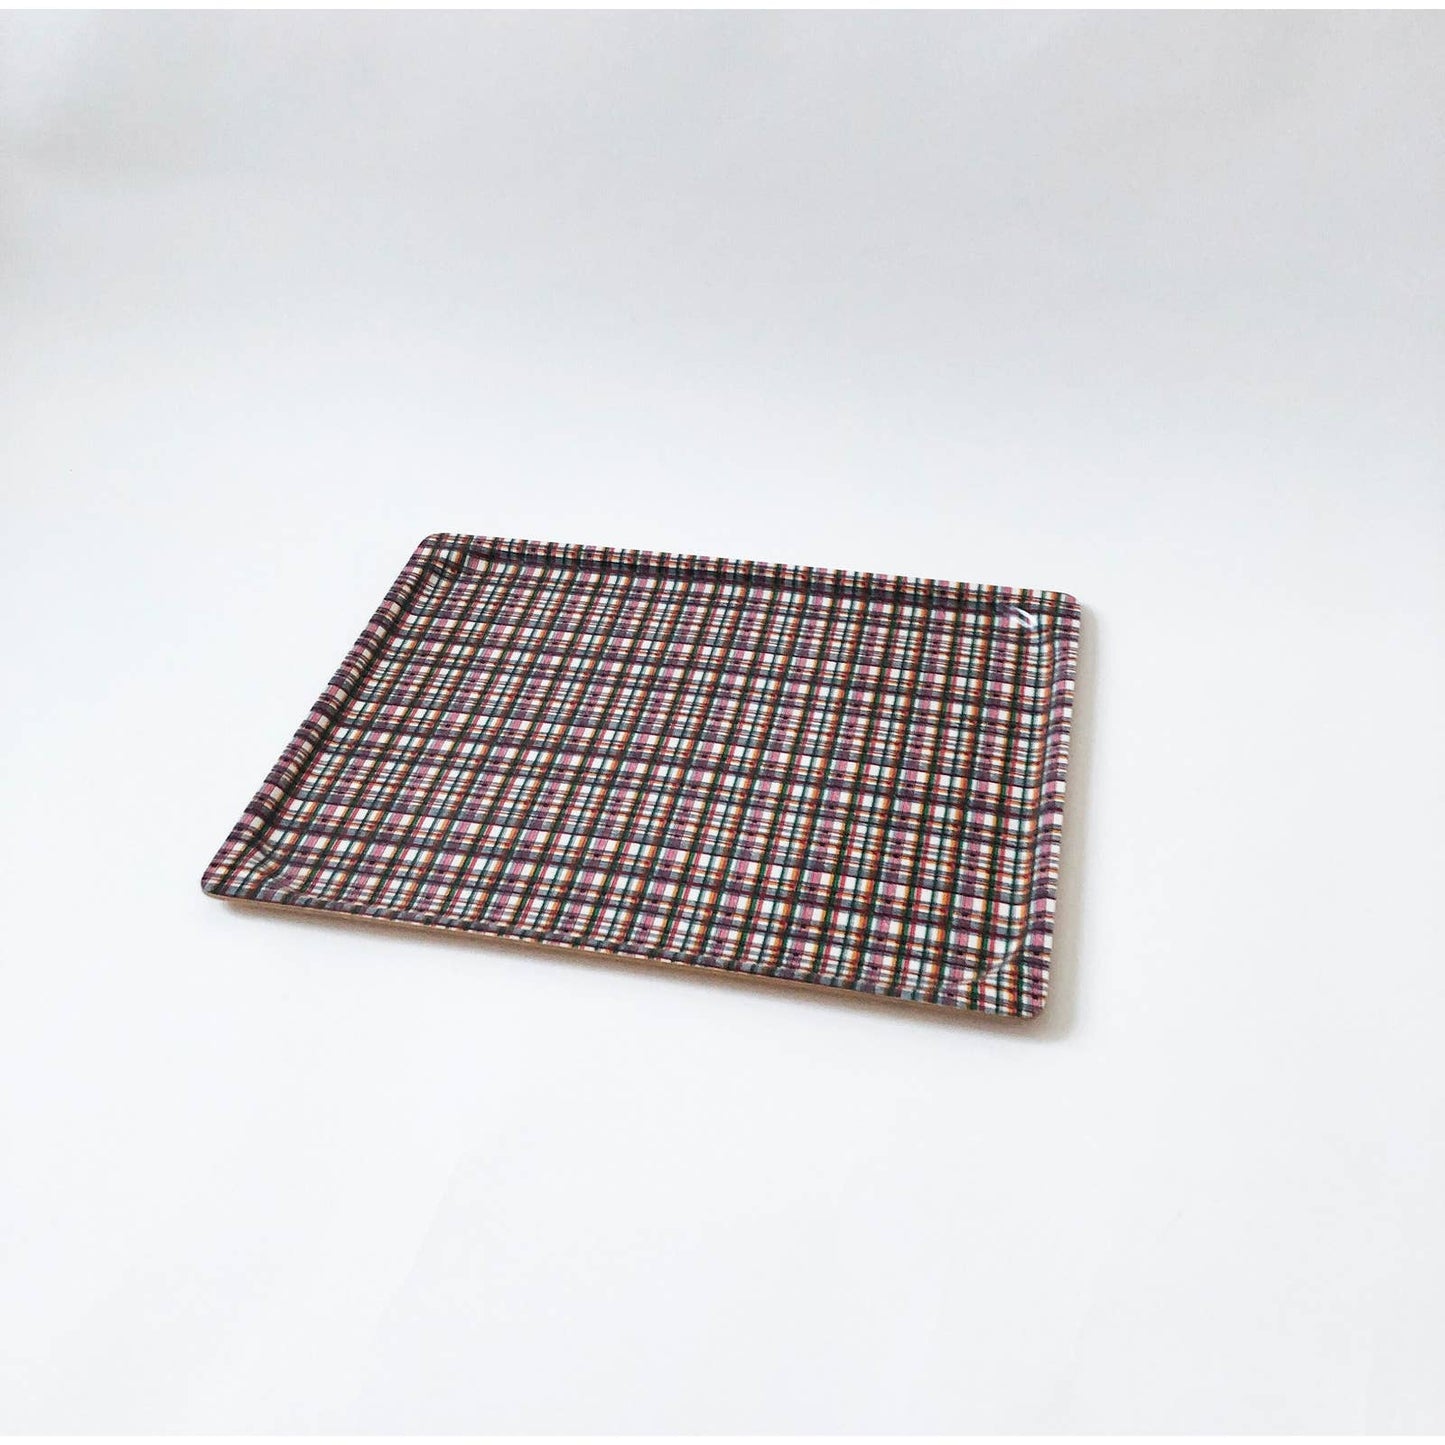 Vintage Classic Rectangular Colorful Summer Plaid Serving Tray